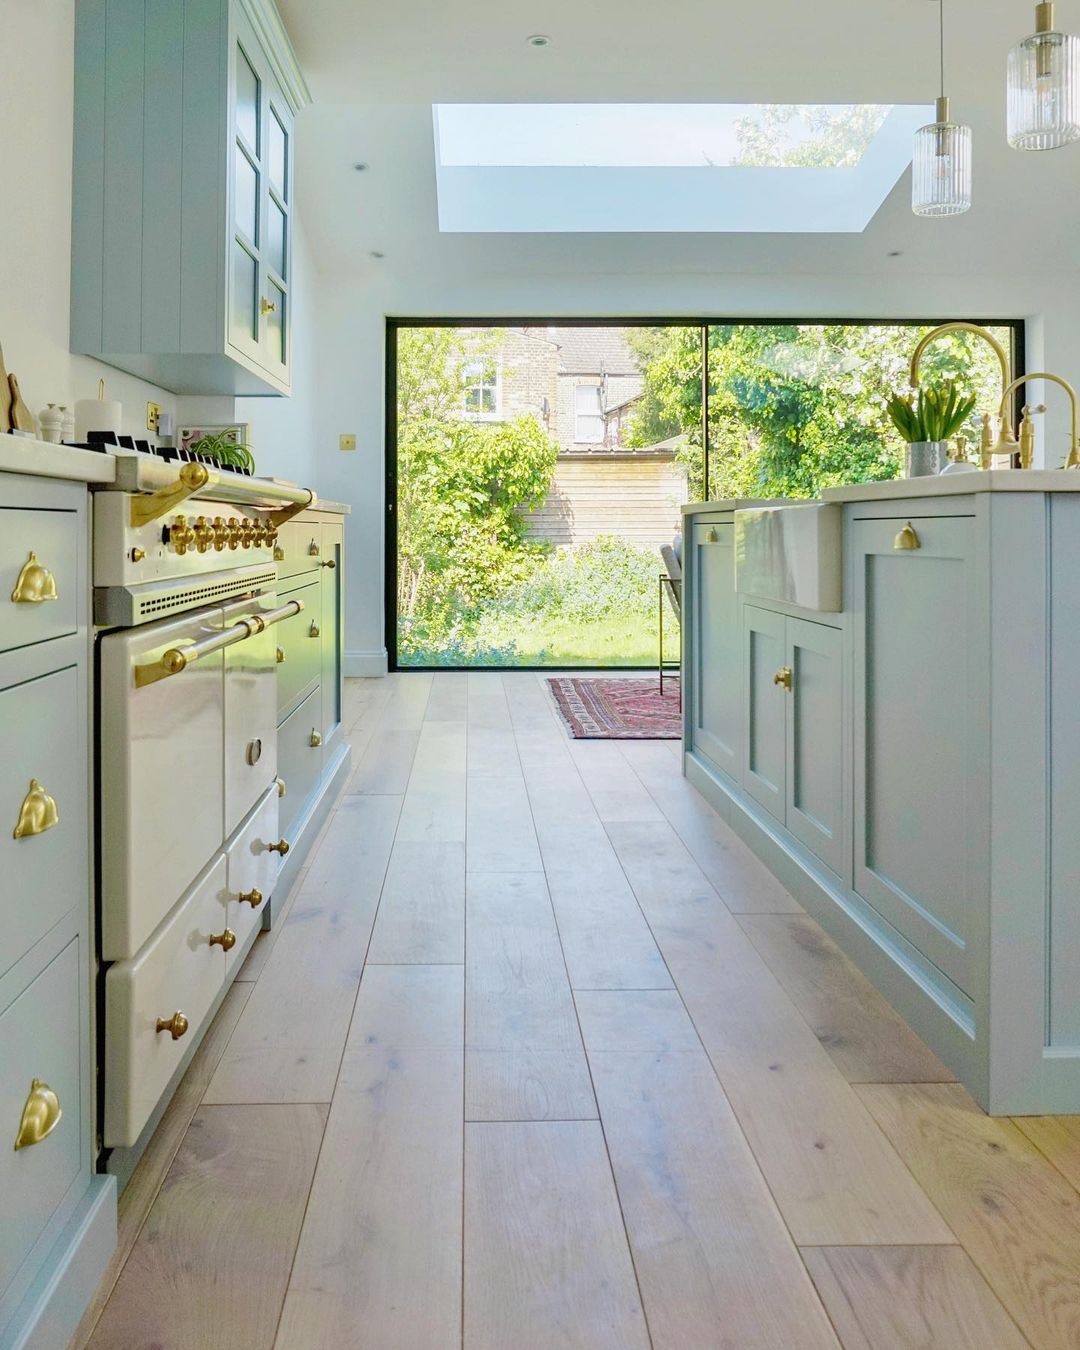 Spacious Kitchen with New Oak Floor Boards. Photo by Instagram user @thelondonhomefix